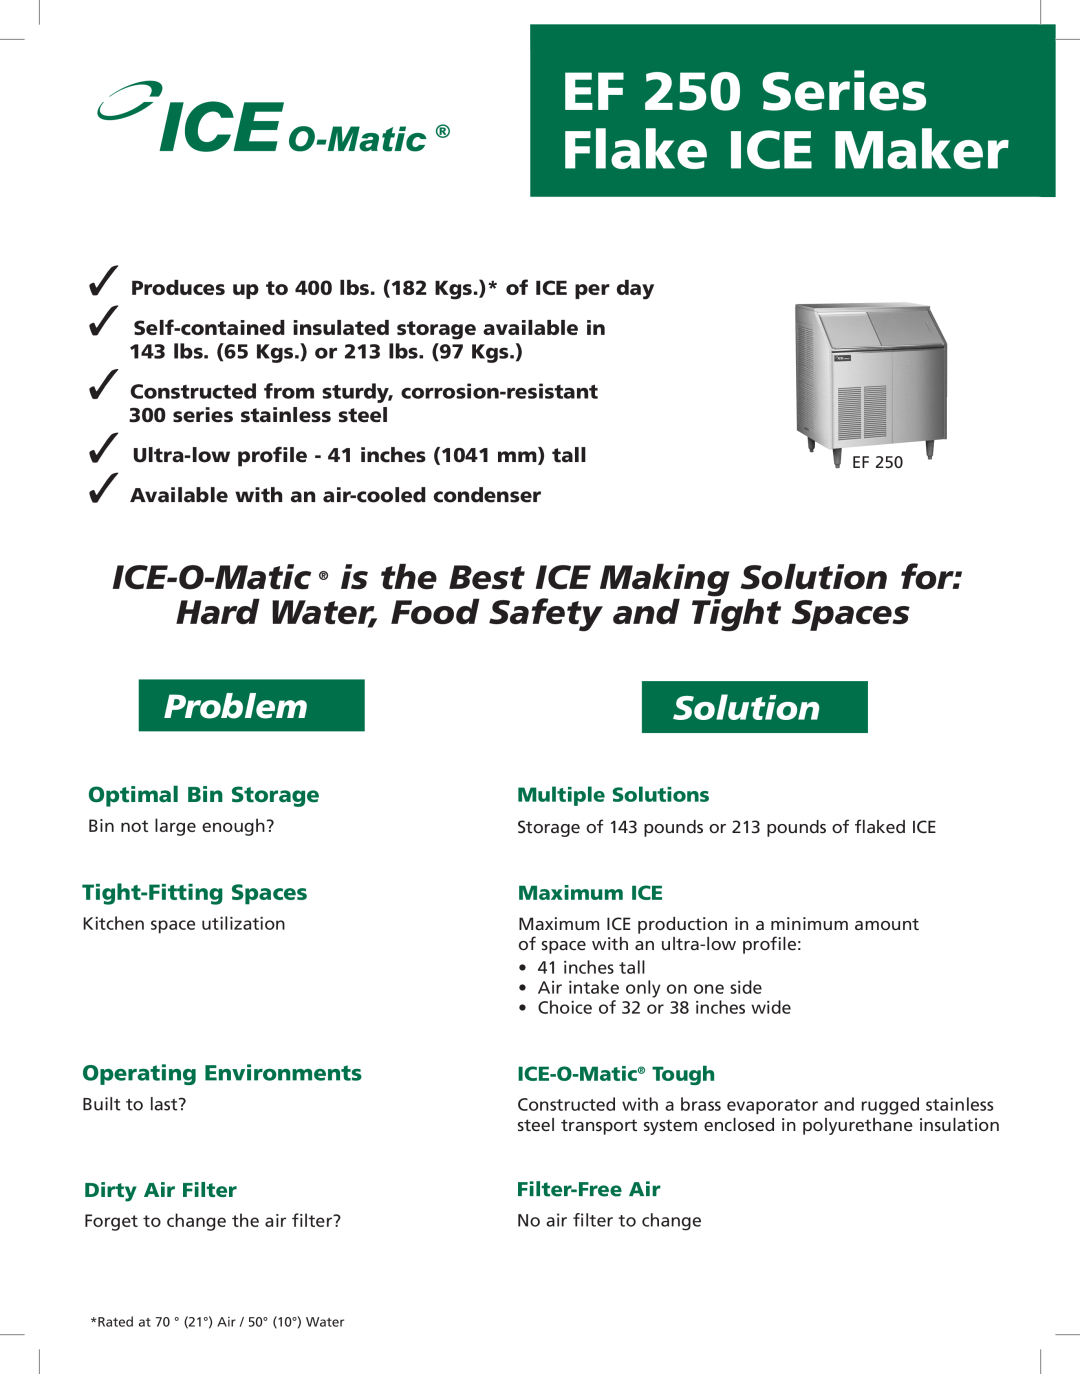 Ice-O-Matic EF250 manual EF 250 Series Flake ICE Maker, Problem, Solution, Optimal Bin Storage, Tight-FittingSpaces 